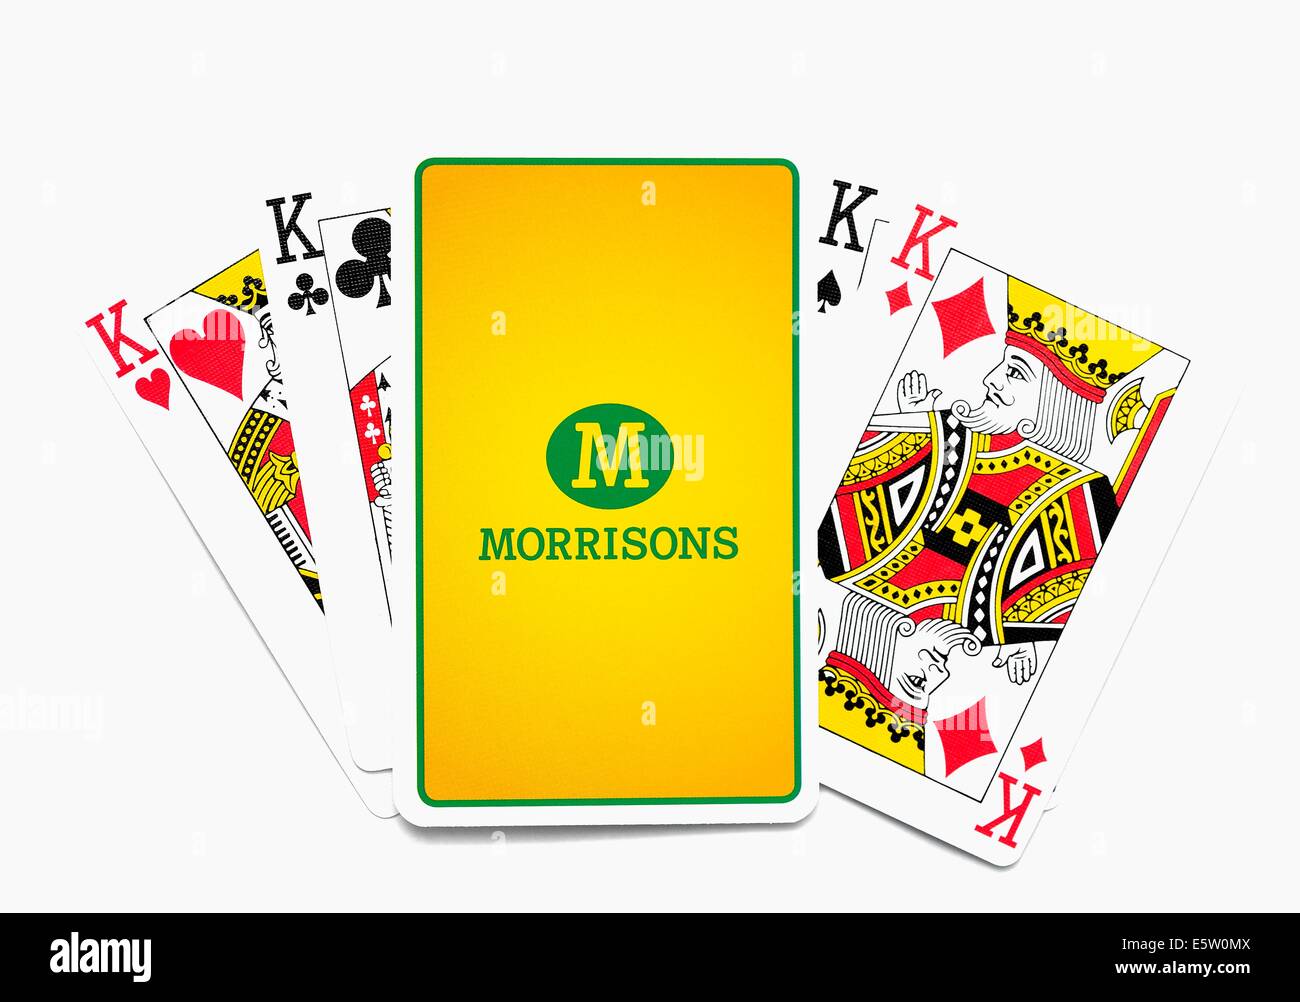 Morrisons supermarket playing cards with 4 kings Stock Photo